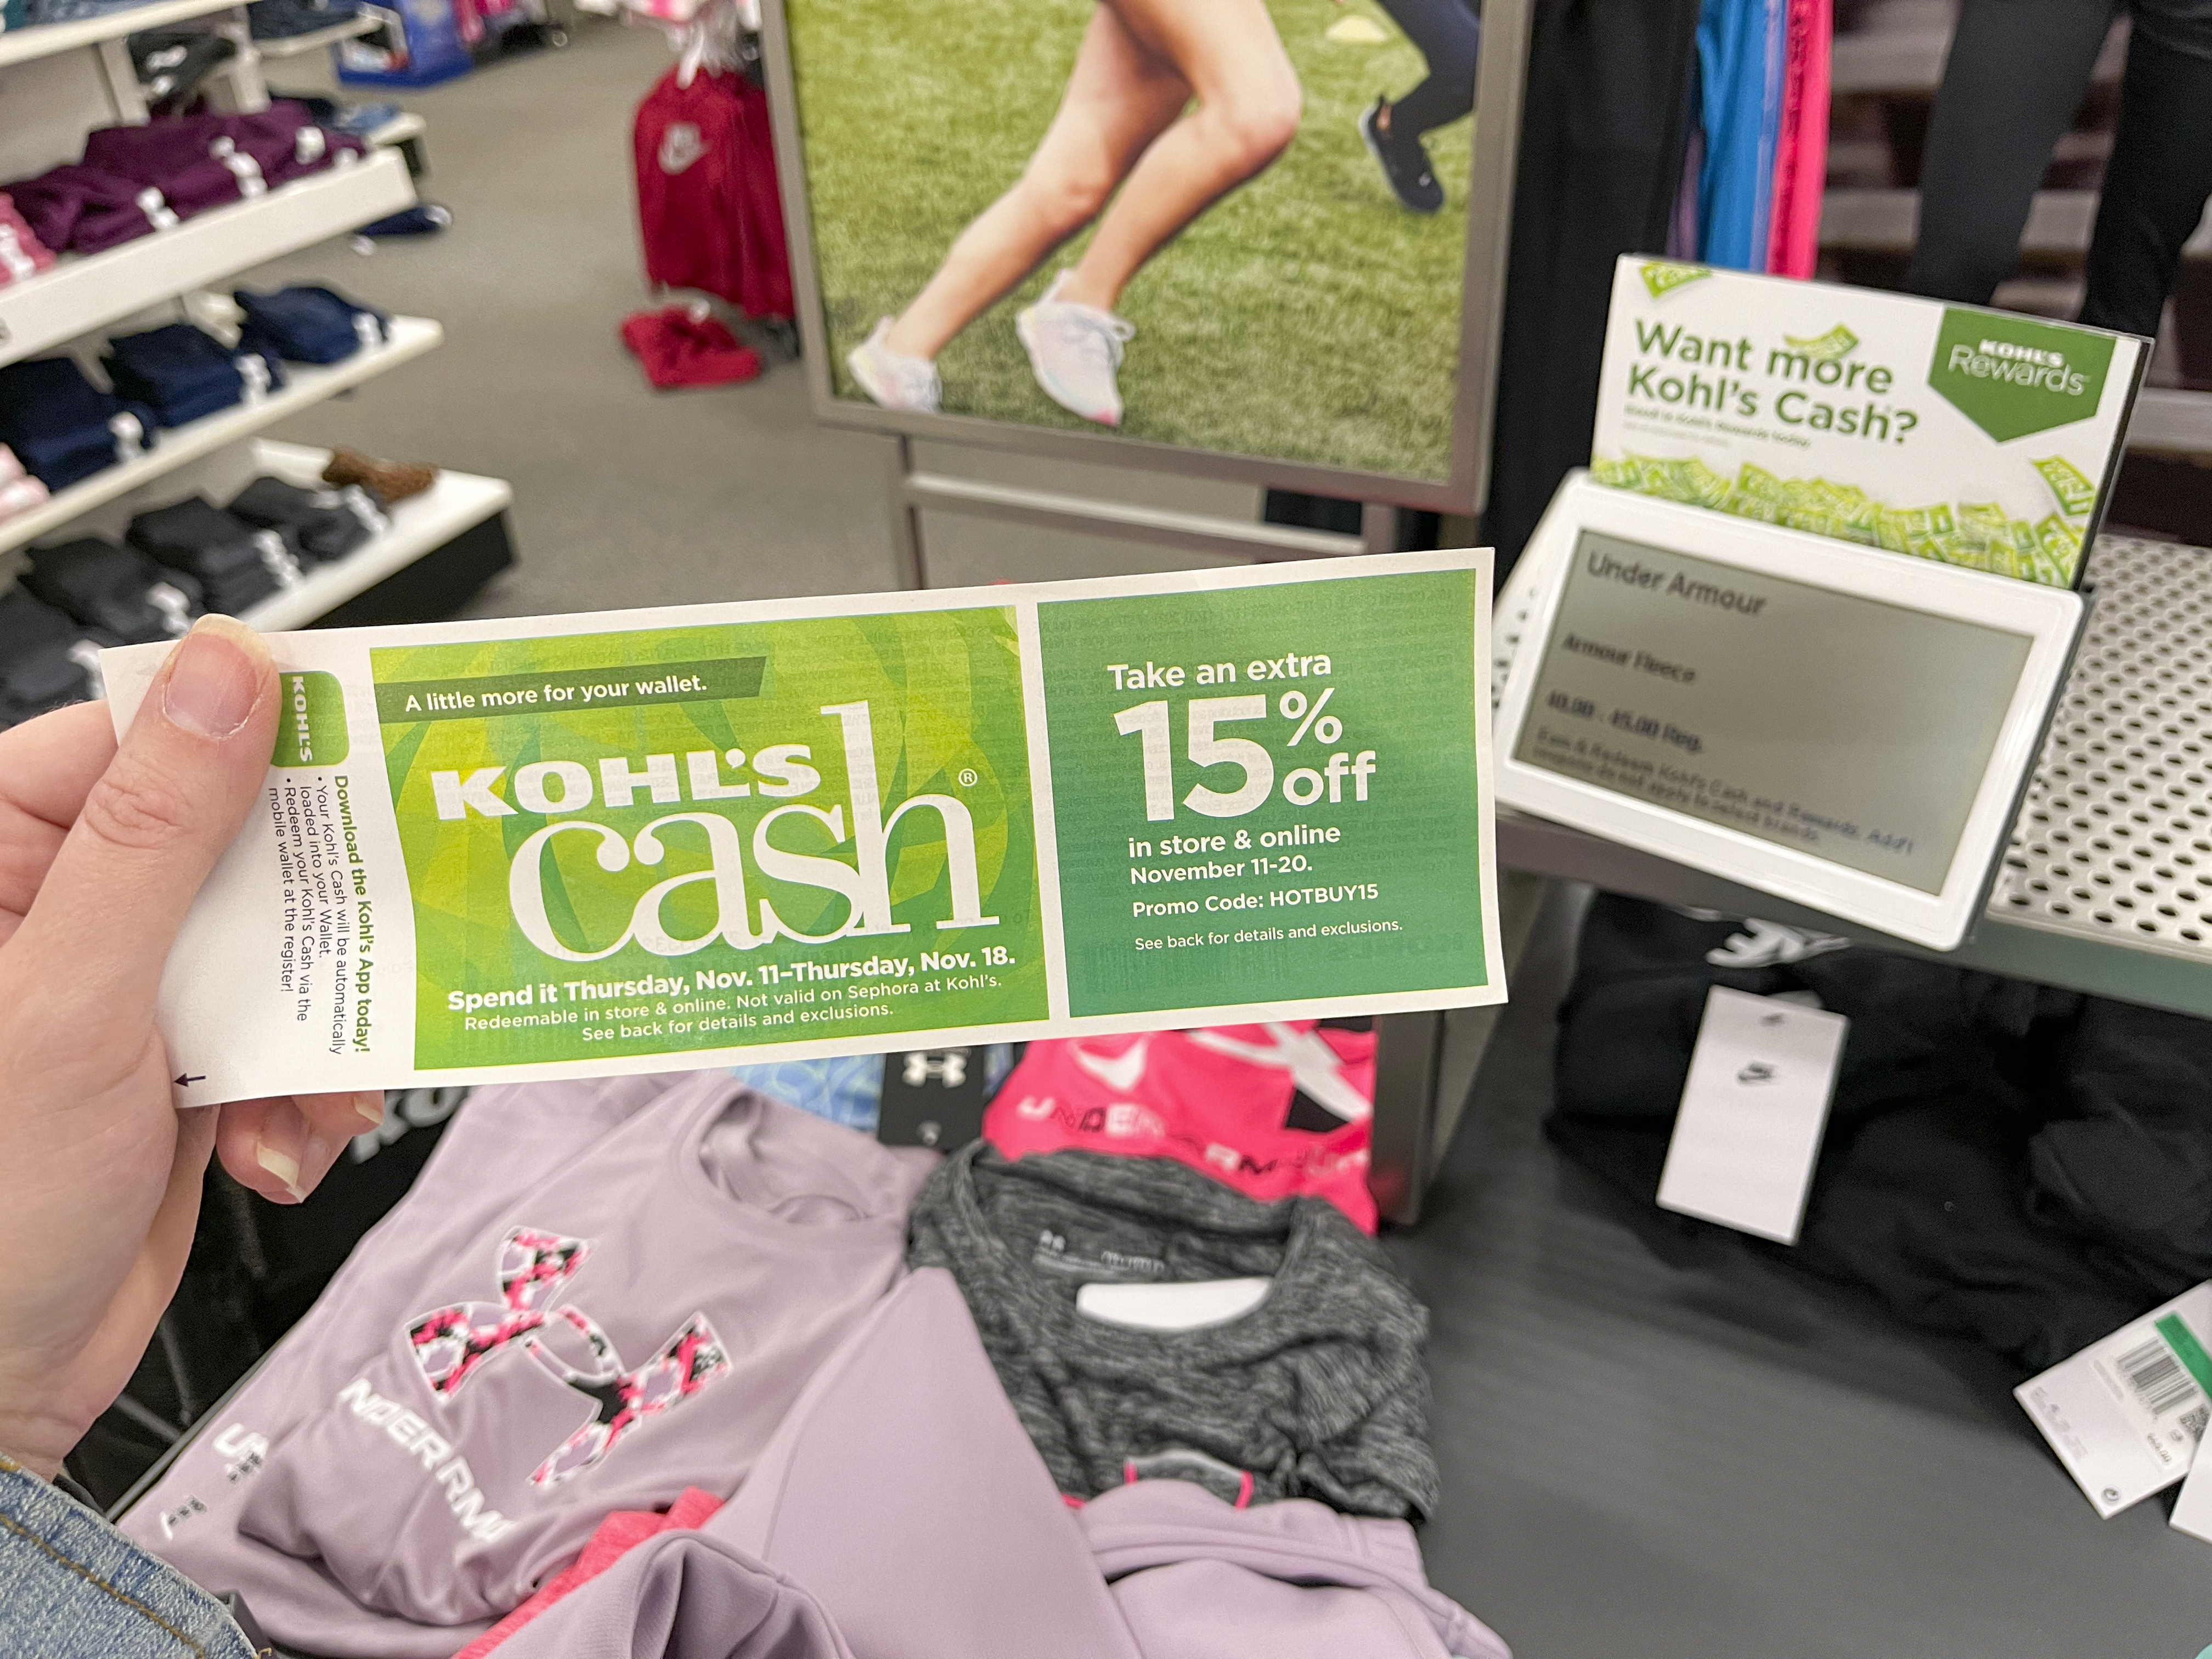 Hello, Kohl's Cash! How to Use Kohl's Free Money - The Krazy Coupon Lady